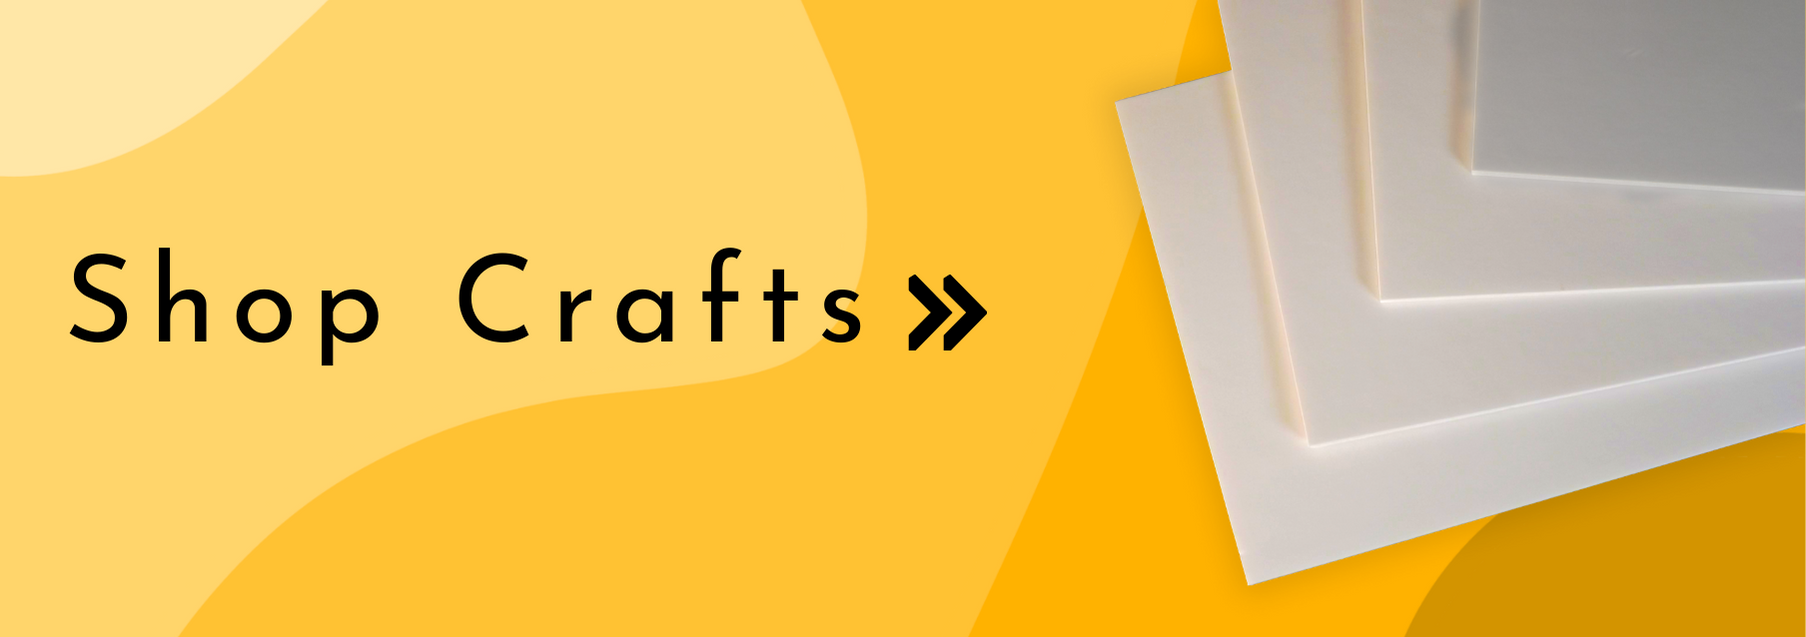 Image for the Crafts category, featuring a stack of white foamboard on a dual-tone yellow background, with the text 'Shop Crafts >>' in bold, dark font.